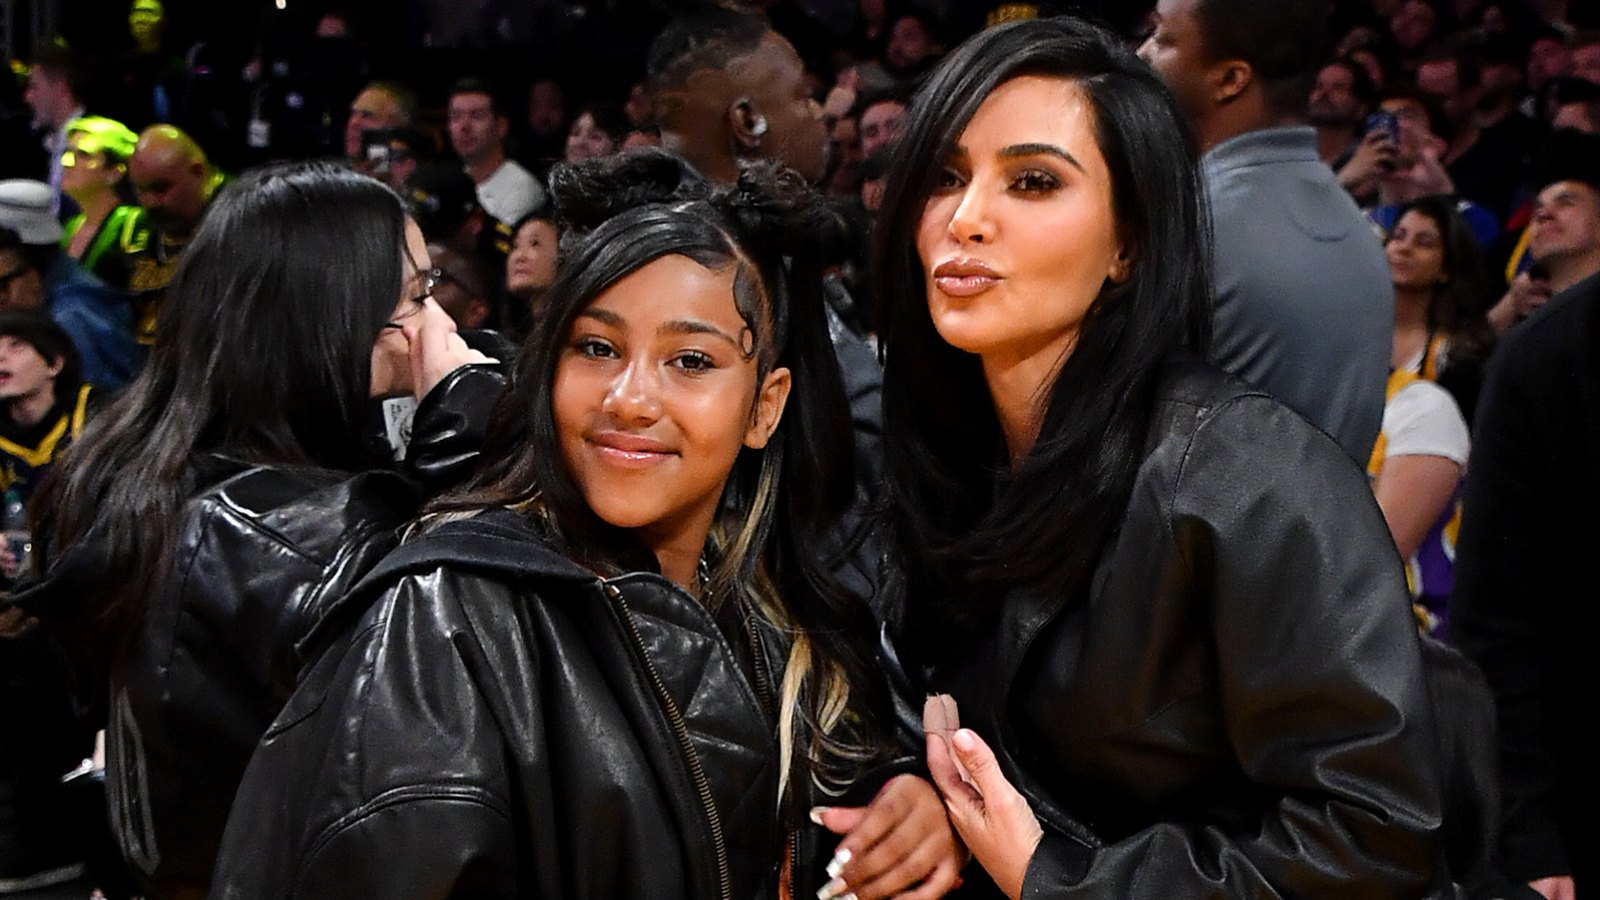 North West to Star in Disney's 'Lion King' 30th Anniversary Concert at the Hollywood Bowl